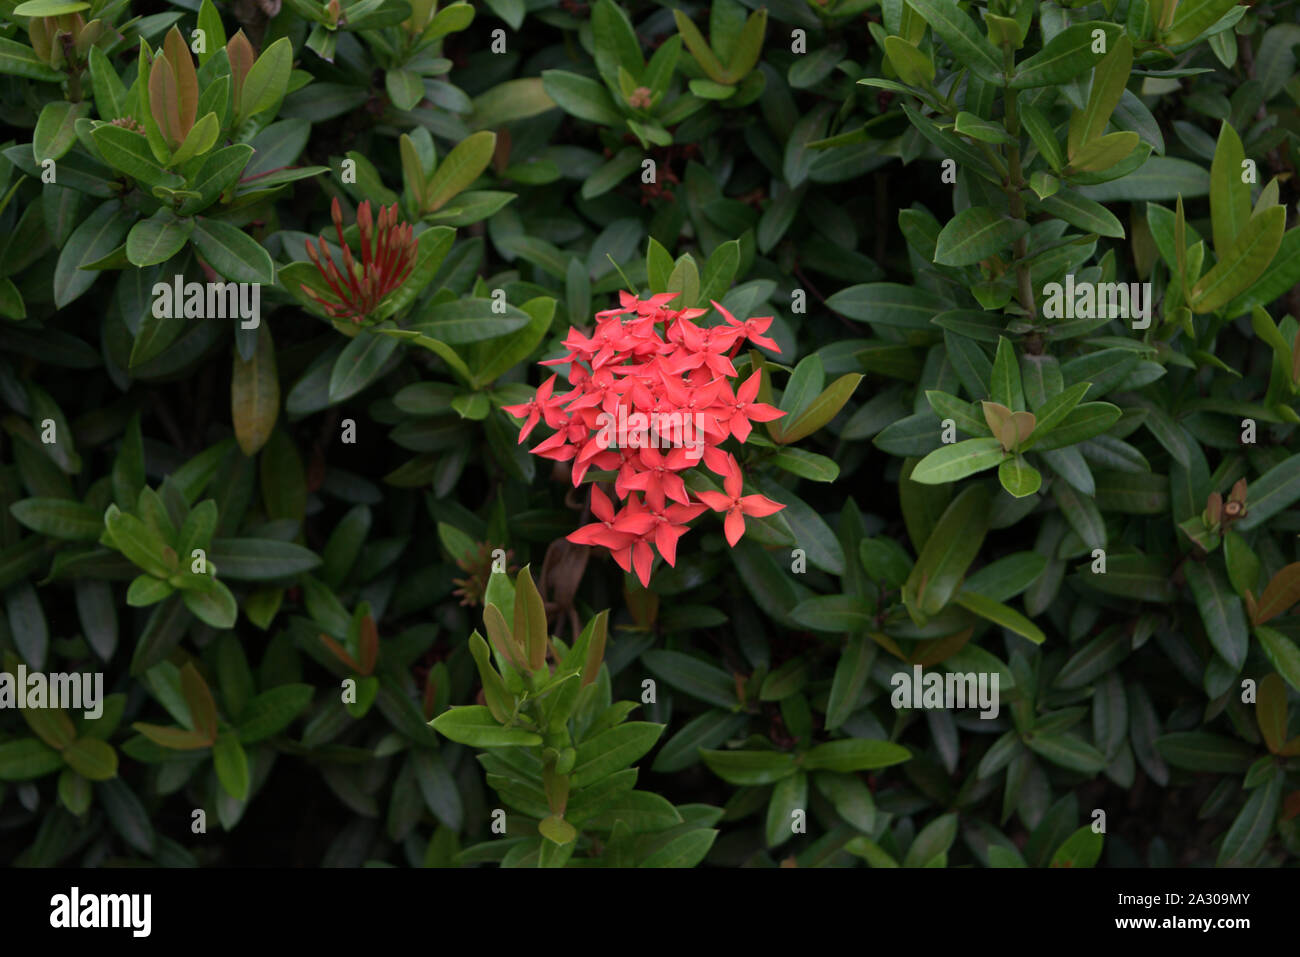 Blossom of pink flowers on a bush Stock Photo